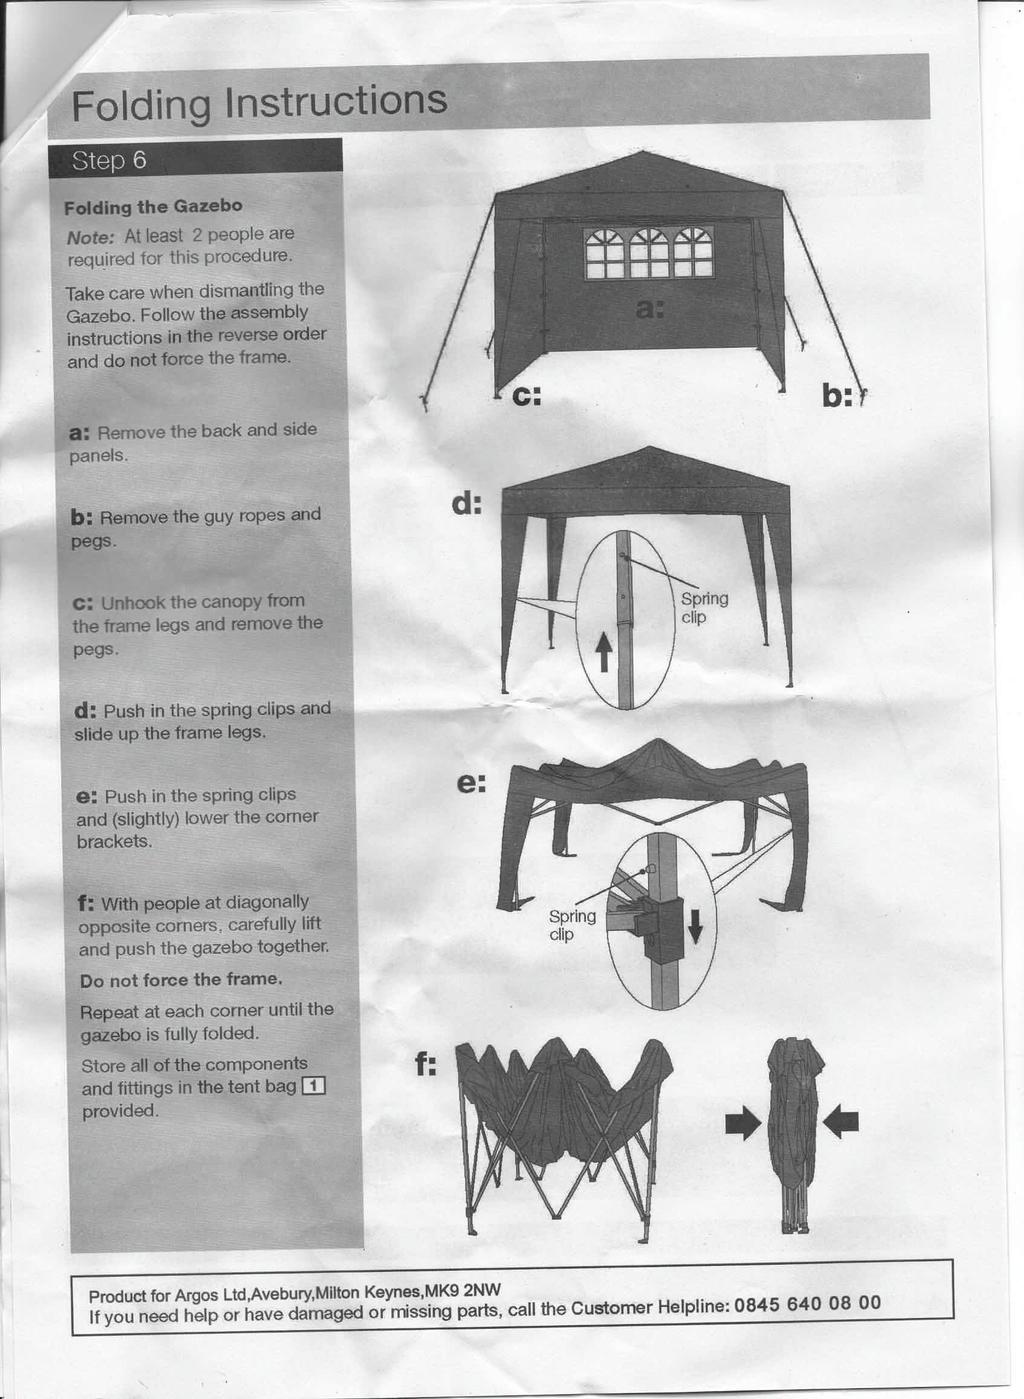 Folding Instructions Step 6 Folding the Gazebo Take care when dismantling the Gazebo. Follow the assembly instructions in the reverse order and do not force the frame.